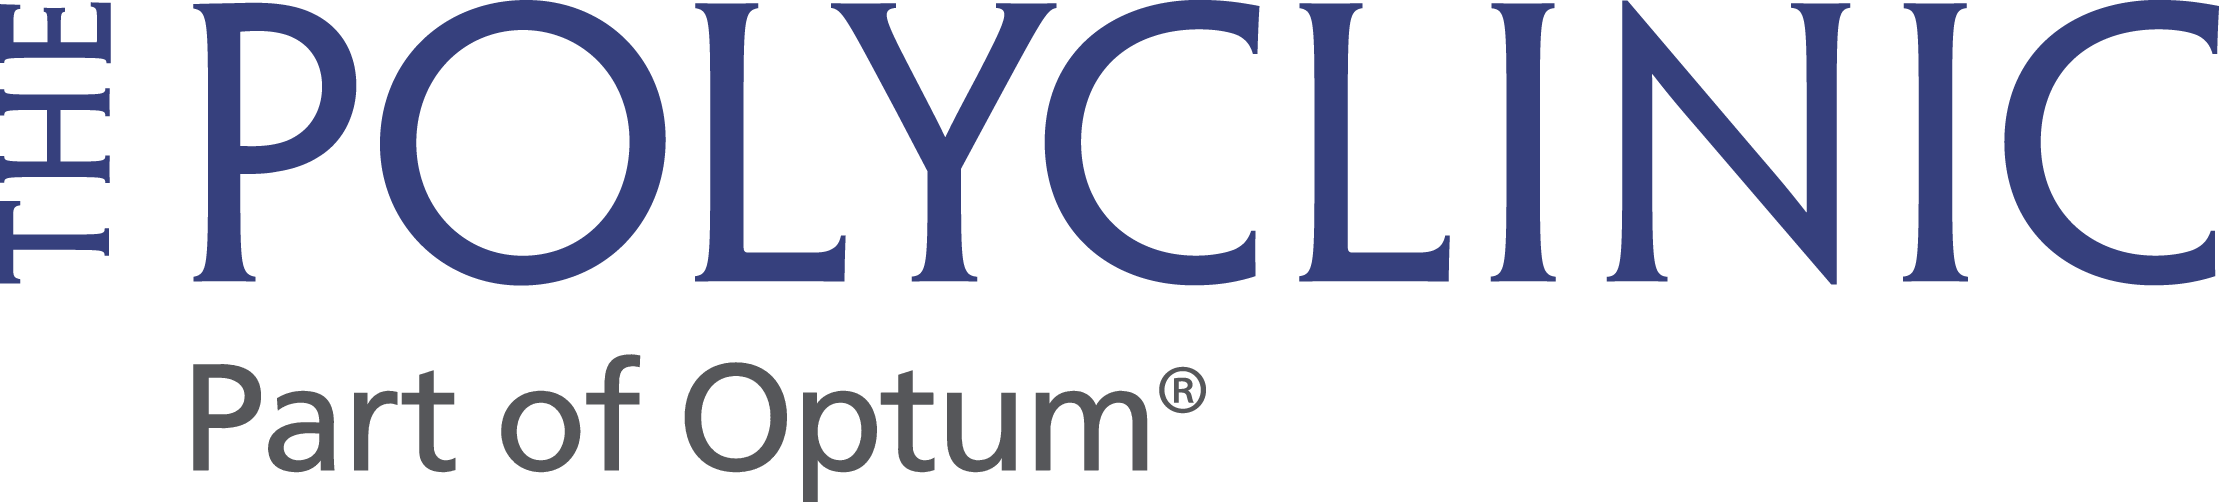 The Polyclinic, part of Optum logo